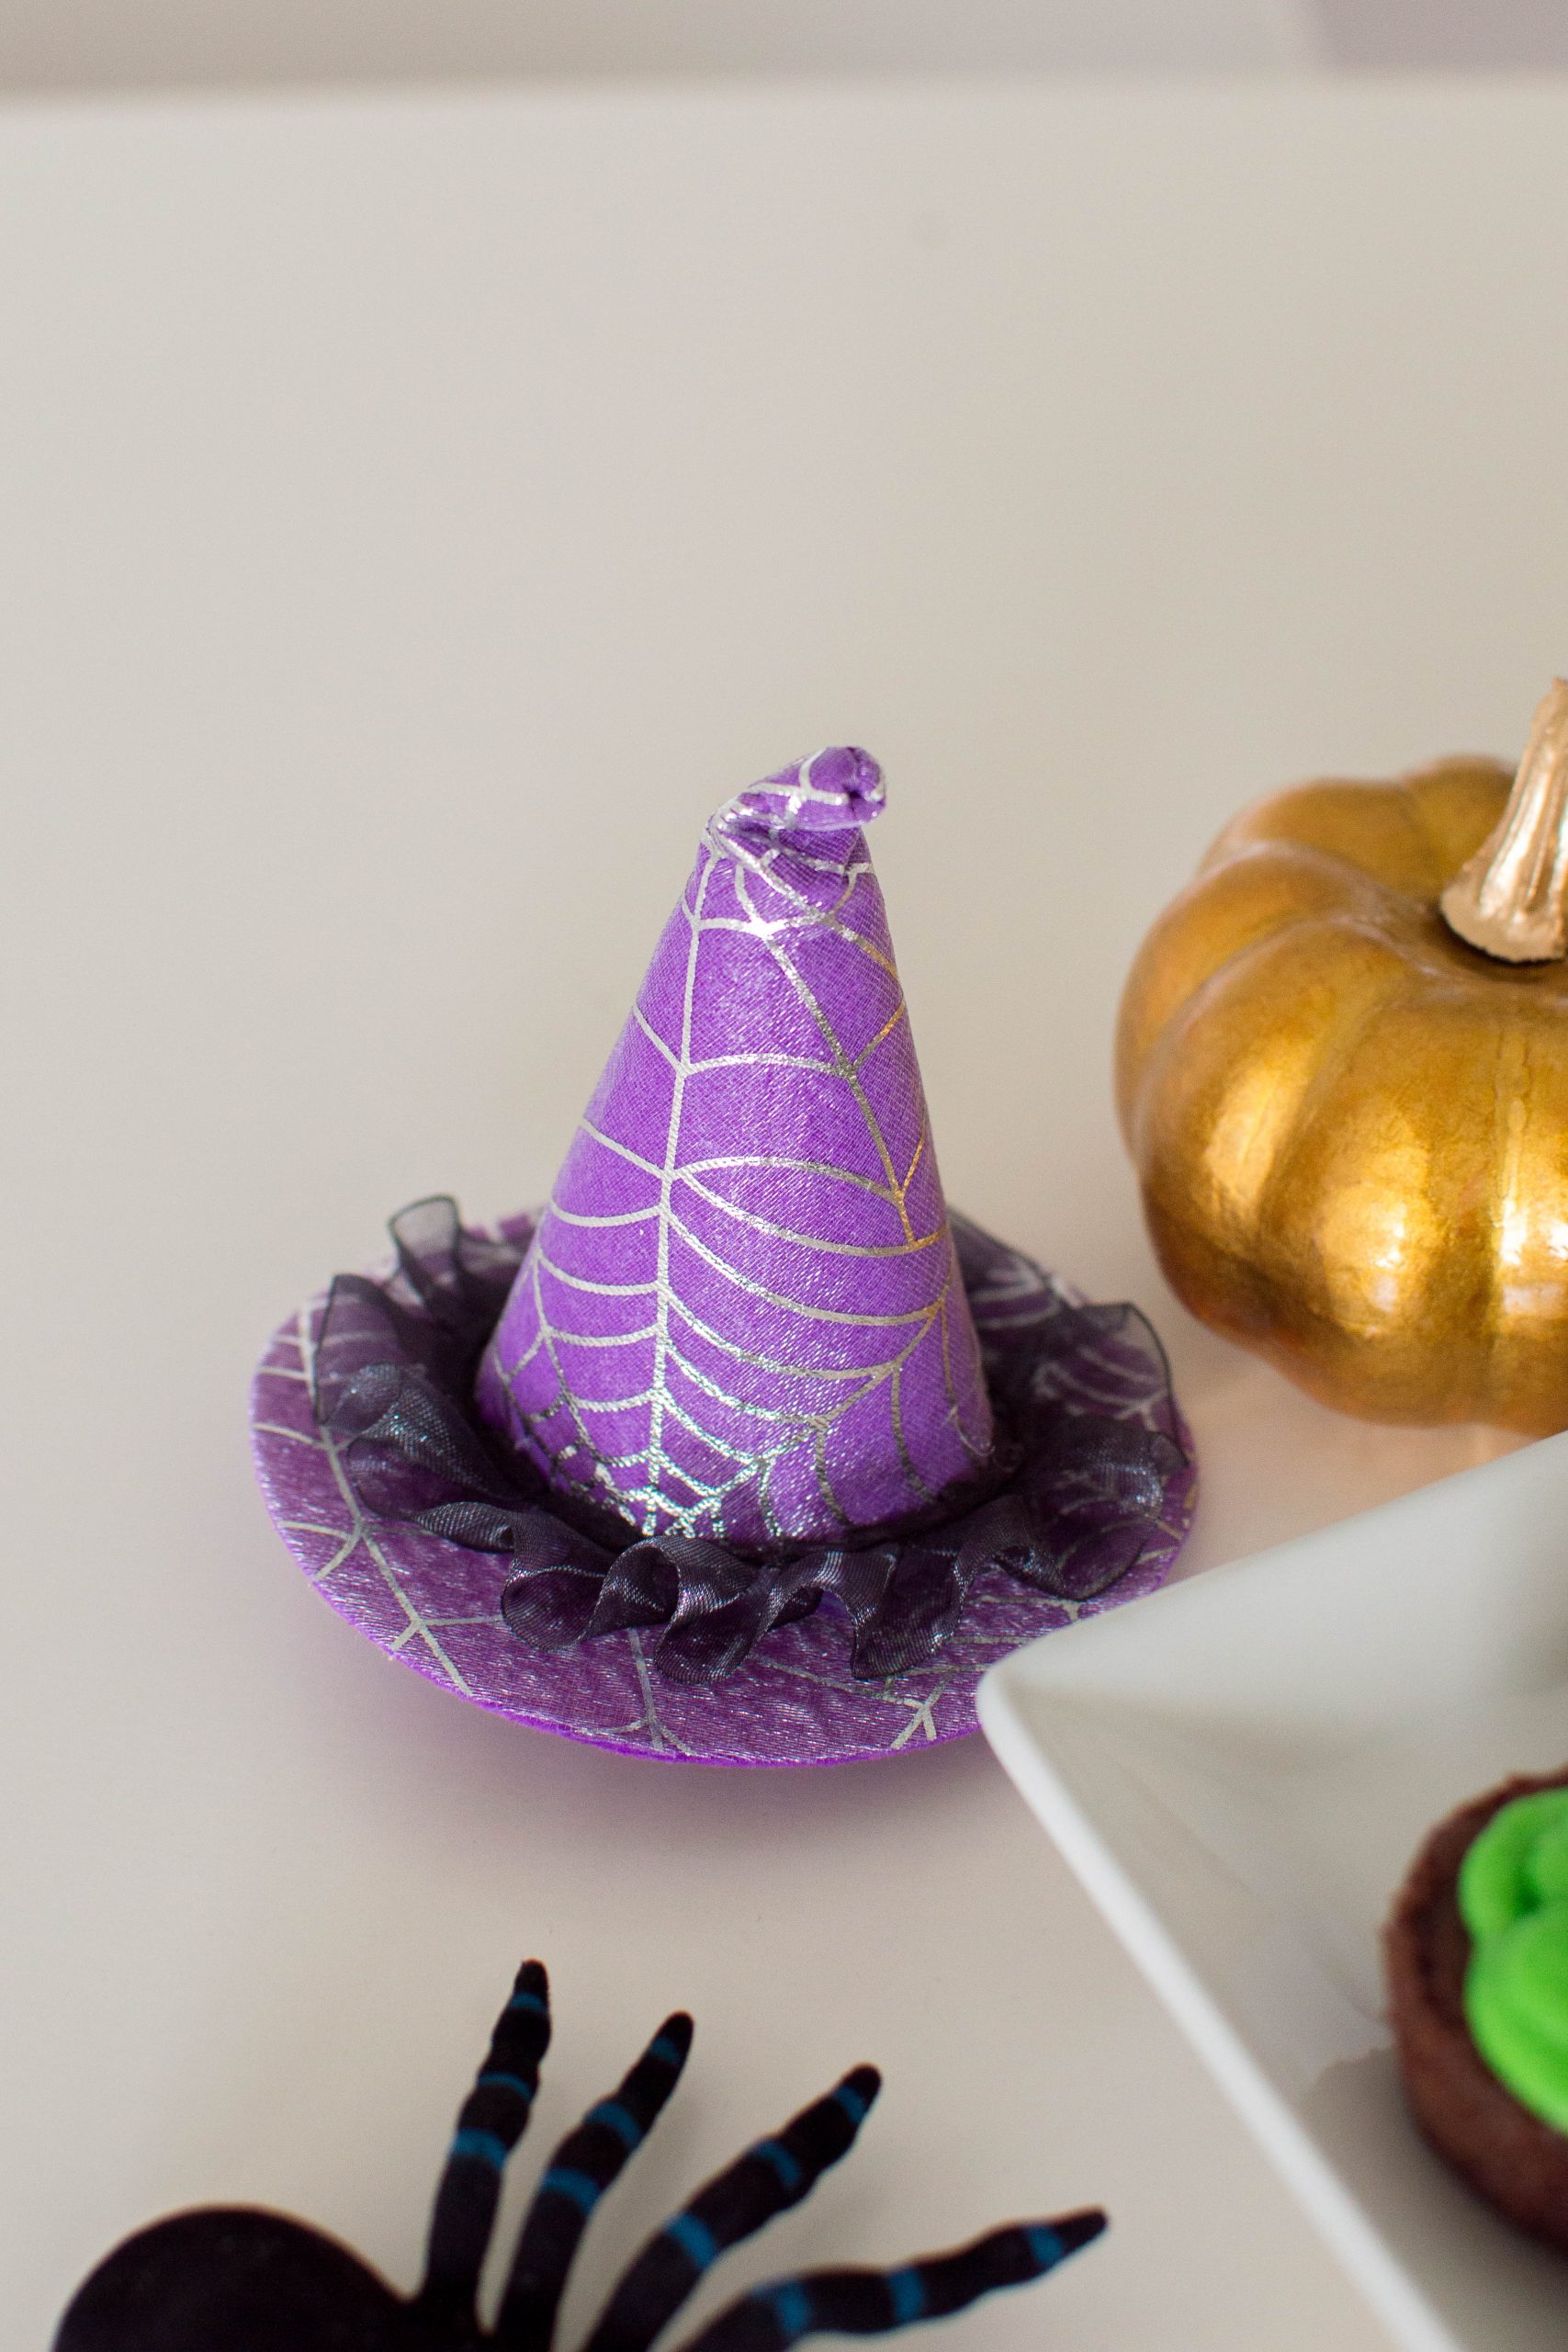 Hocus Pocus 2 is finally released on Disney+ and we’re ecstatic! Check out our thematic desserts that make for the perfect treats for your upcoming Hocus Pocus 2 Watch Party!